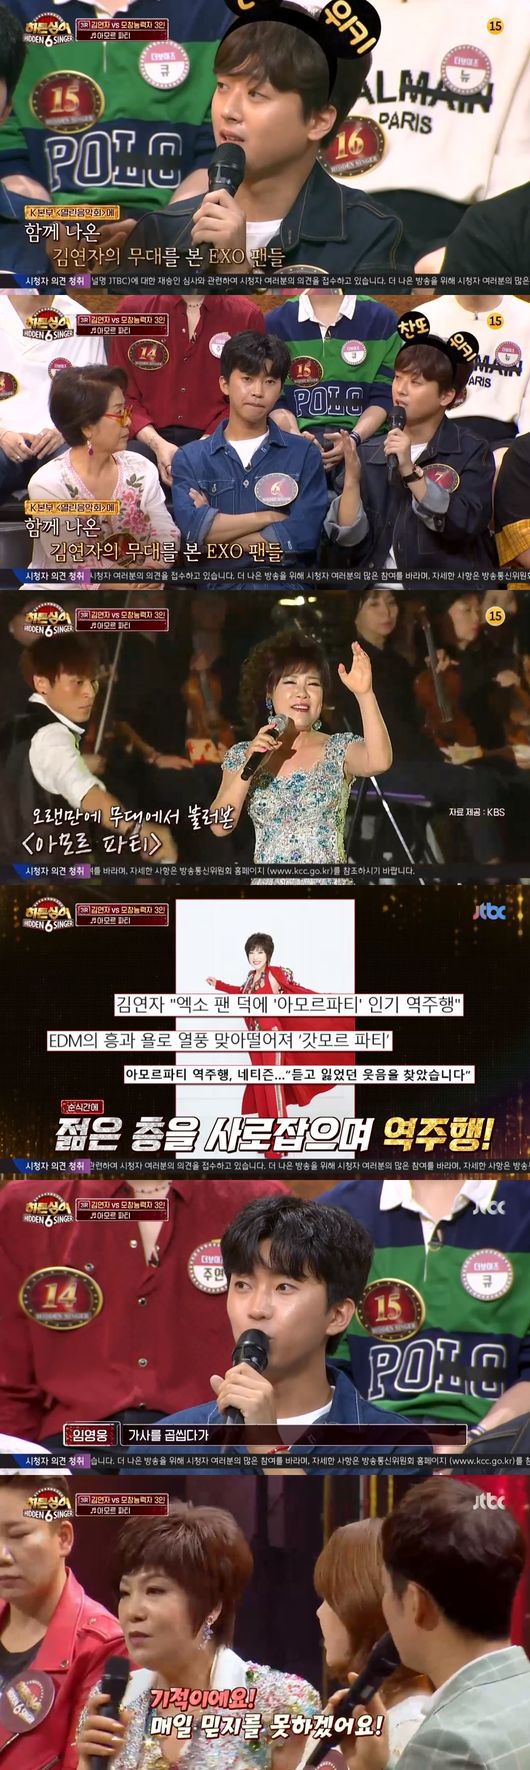 Lee Chan-won has demonstrated Chantowikis ability.In JTBC Hidden singer 6 broadcast on the 7th, Lee Chan-won, who appeared as an entertainer panelist while Yonja Kim became an original singer, played a role as a chanto wiki.The third round of the day was Amor Party. Yonja Kim said, Its a song written by Yoon Il-sang.I liked Lee Eun-mis I have a lover, but I asked him to make such a song, but he gave me this song. I was born in the world and I never saw this song.I do not know where the first section is and where the second section is. Lee Chan-won said, This song was not popular from the beginning.At that time, Yonja Kim said, It is a song that EXO seniors fans watched and made a video on the stage and made a comeback on the chart.When you look at the lyrics, you get a bump, a lot of people pick them as life songs, Lim Yeong-ung said.It seemed like a miracle happened when this song became a comeback on the chart, Yonja Kim said, so Lee Chan-won said, What a miracle happened.I called all the singers who appeared in the finale performance at the end of that year together.This song is really hard, I still lift my hand when Im singing, counting the beat, Yonja Kim said.Jeon Hyun-moo laughed, Then, is it Mr. Yonja Kim who misses the beat? Yonja Kim said, I will do my best.: JTBC Hidden singer 6 broadcast capture